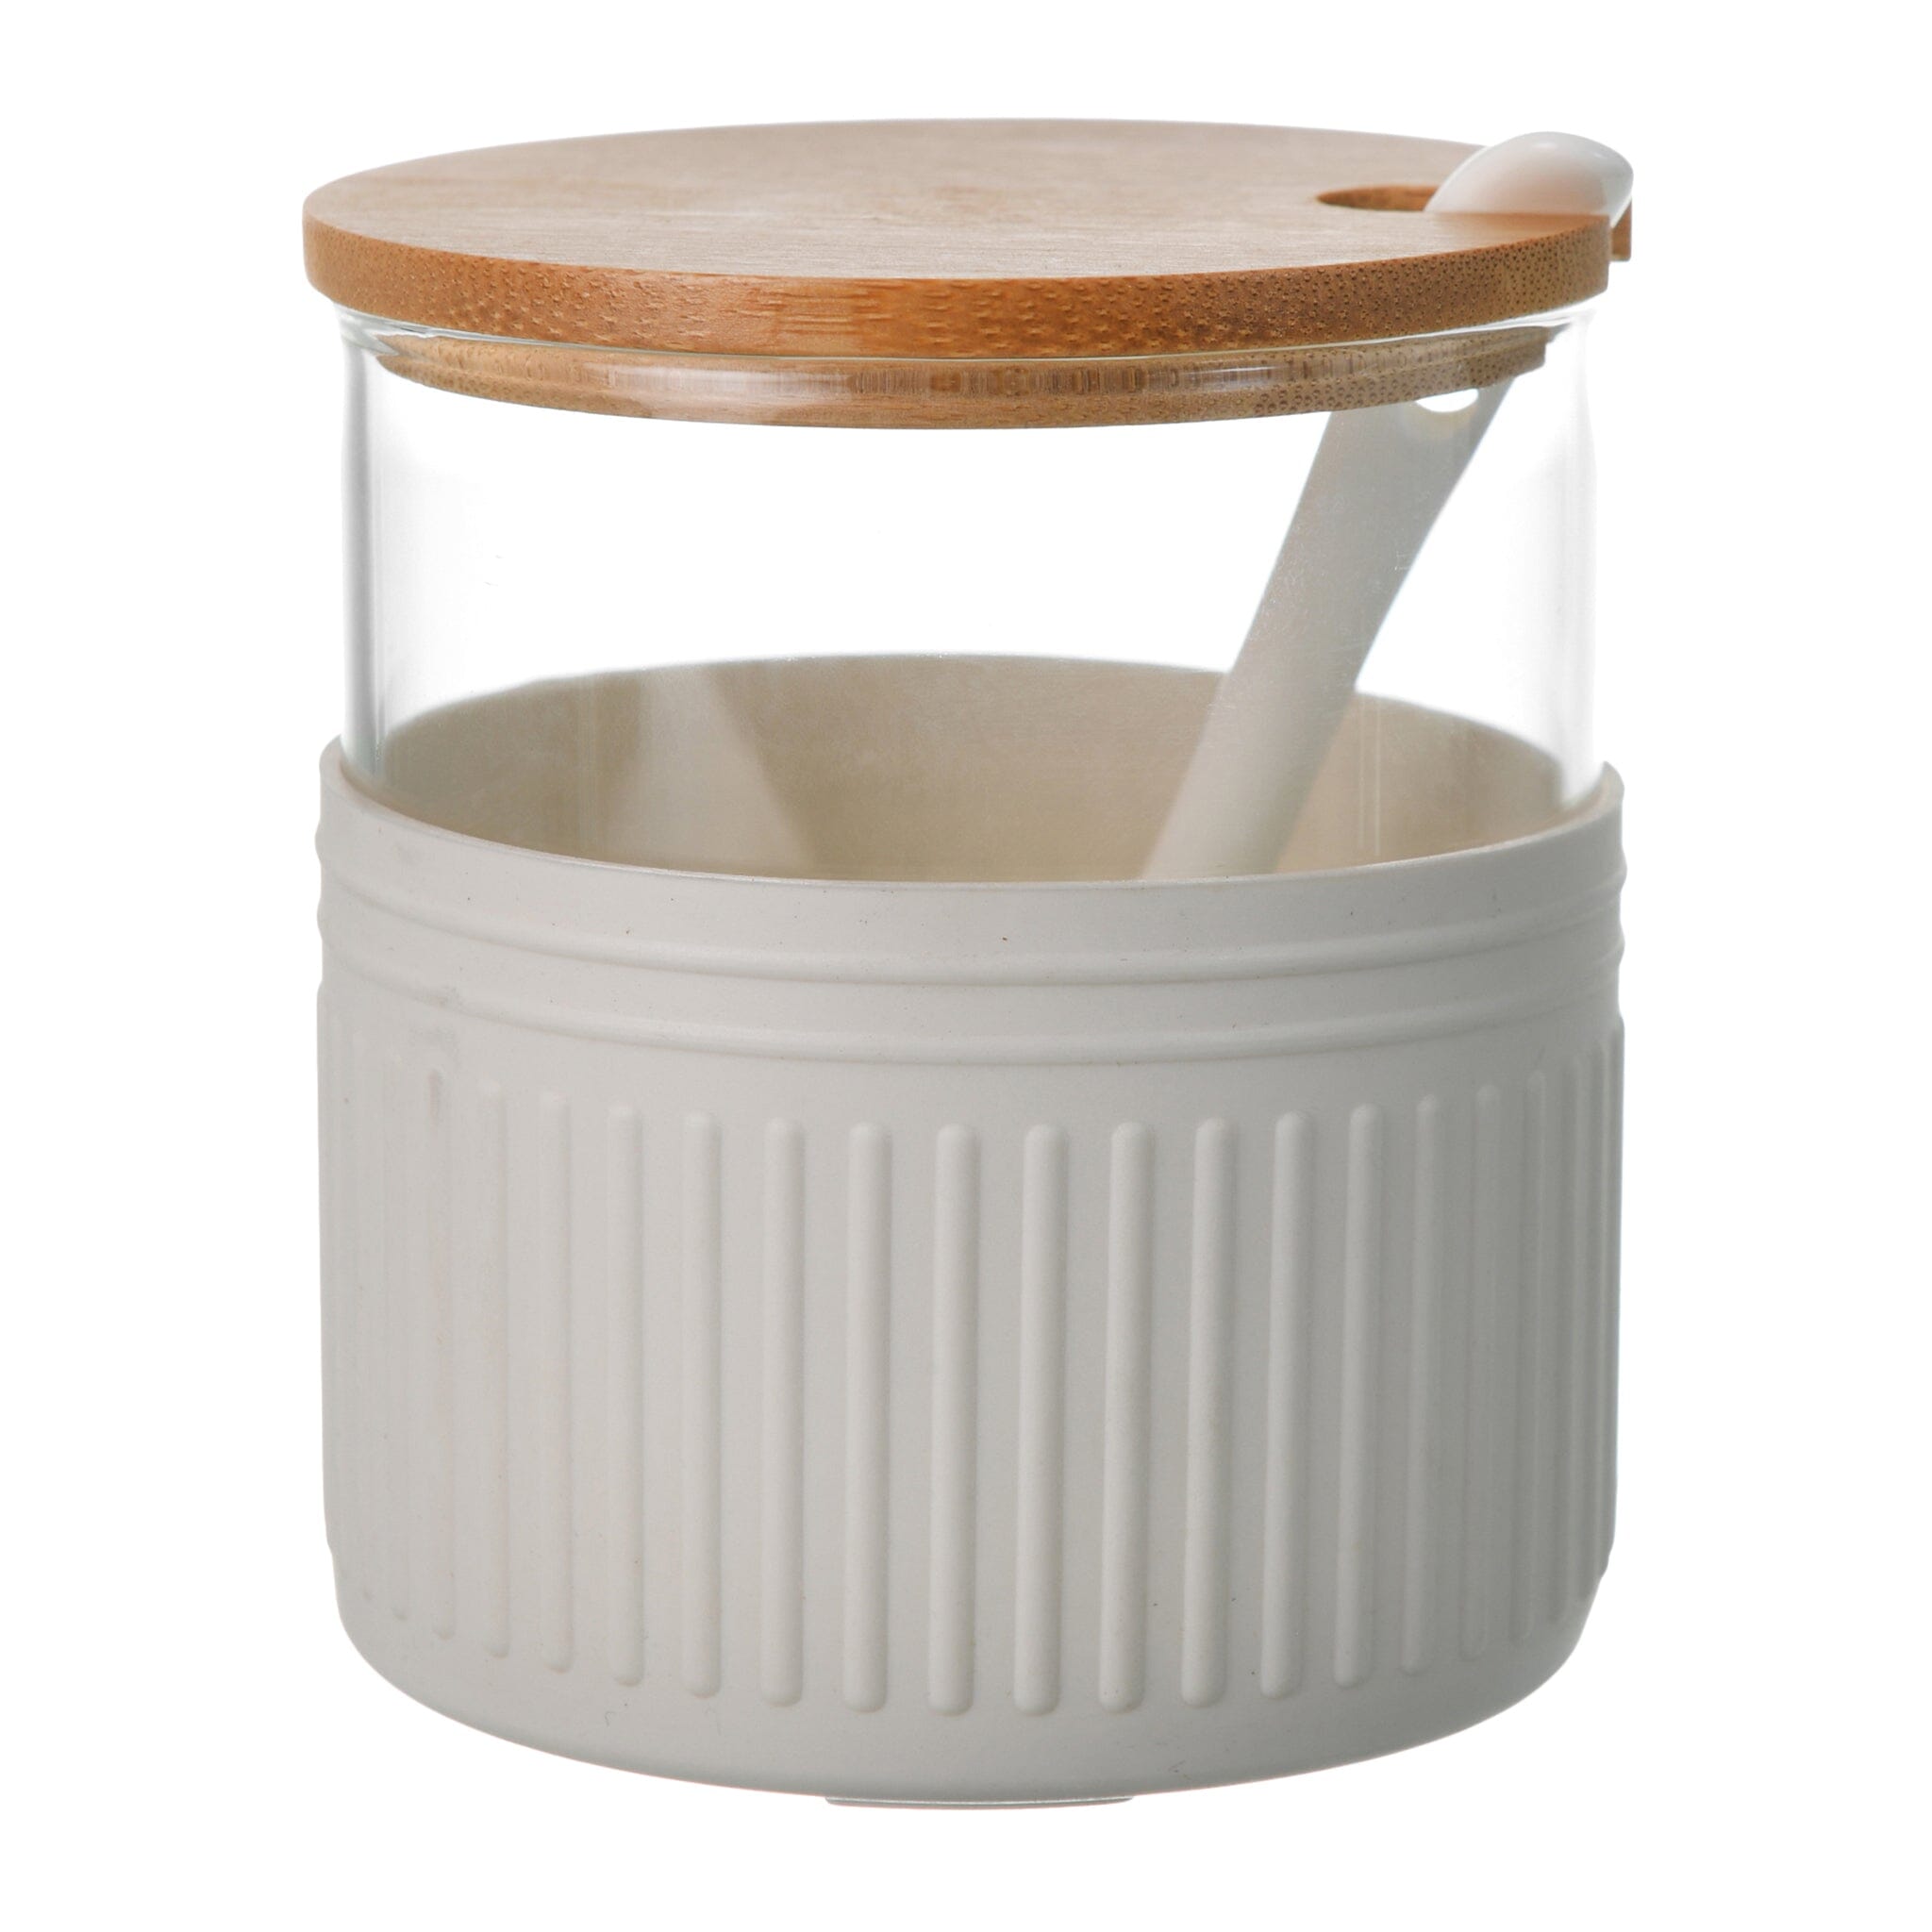 O'lala - Spices Jar with Wooden Cover, Spoon & Silicone Cover - White - 8x10cm - 520008181